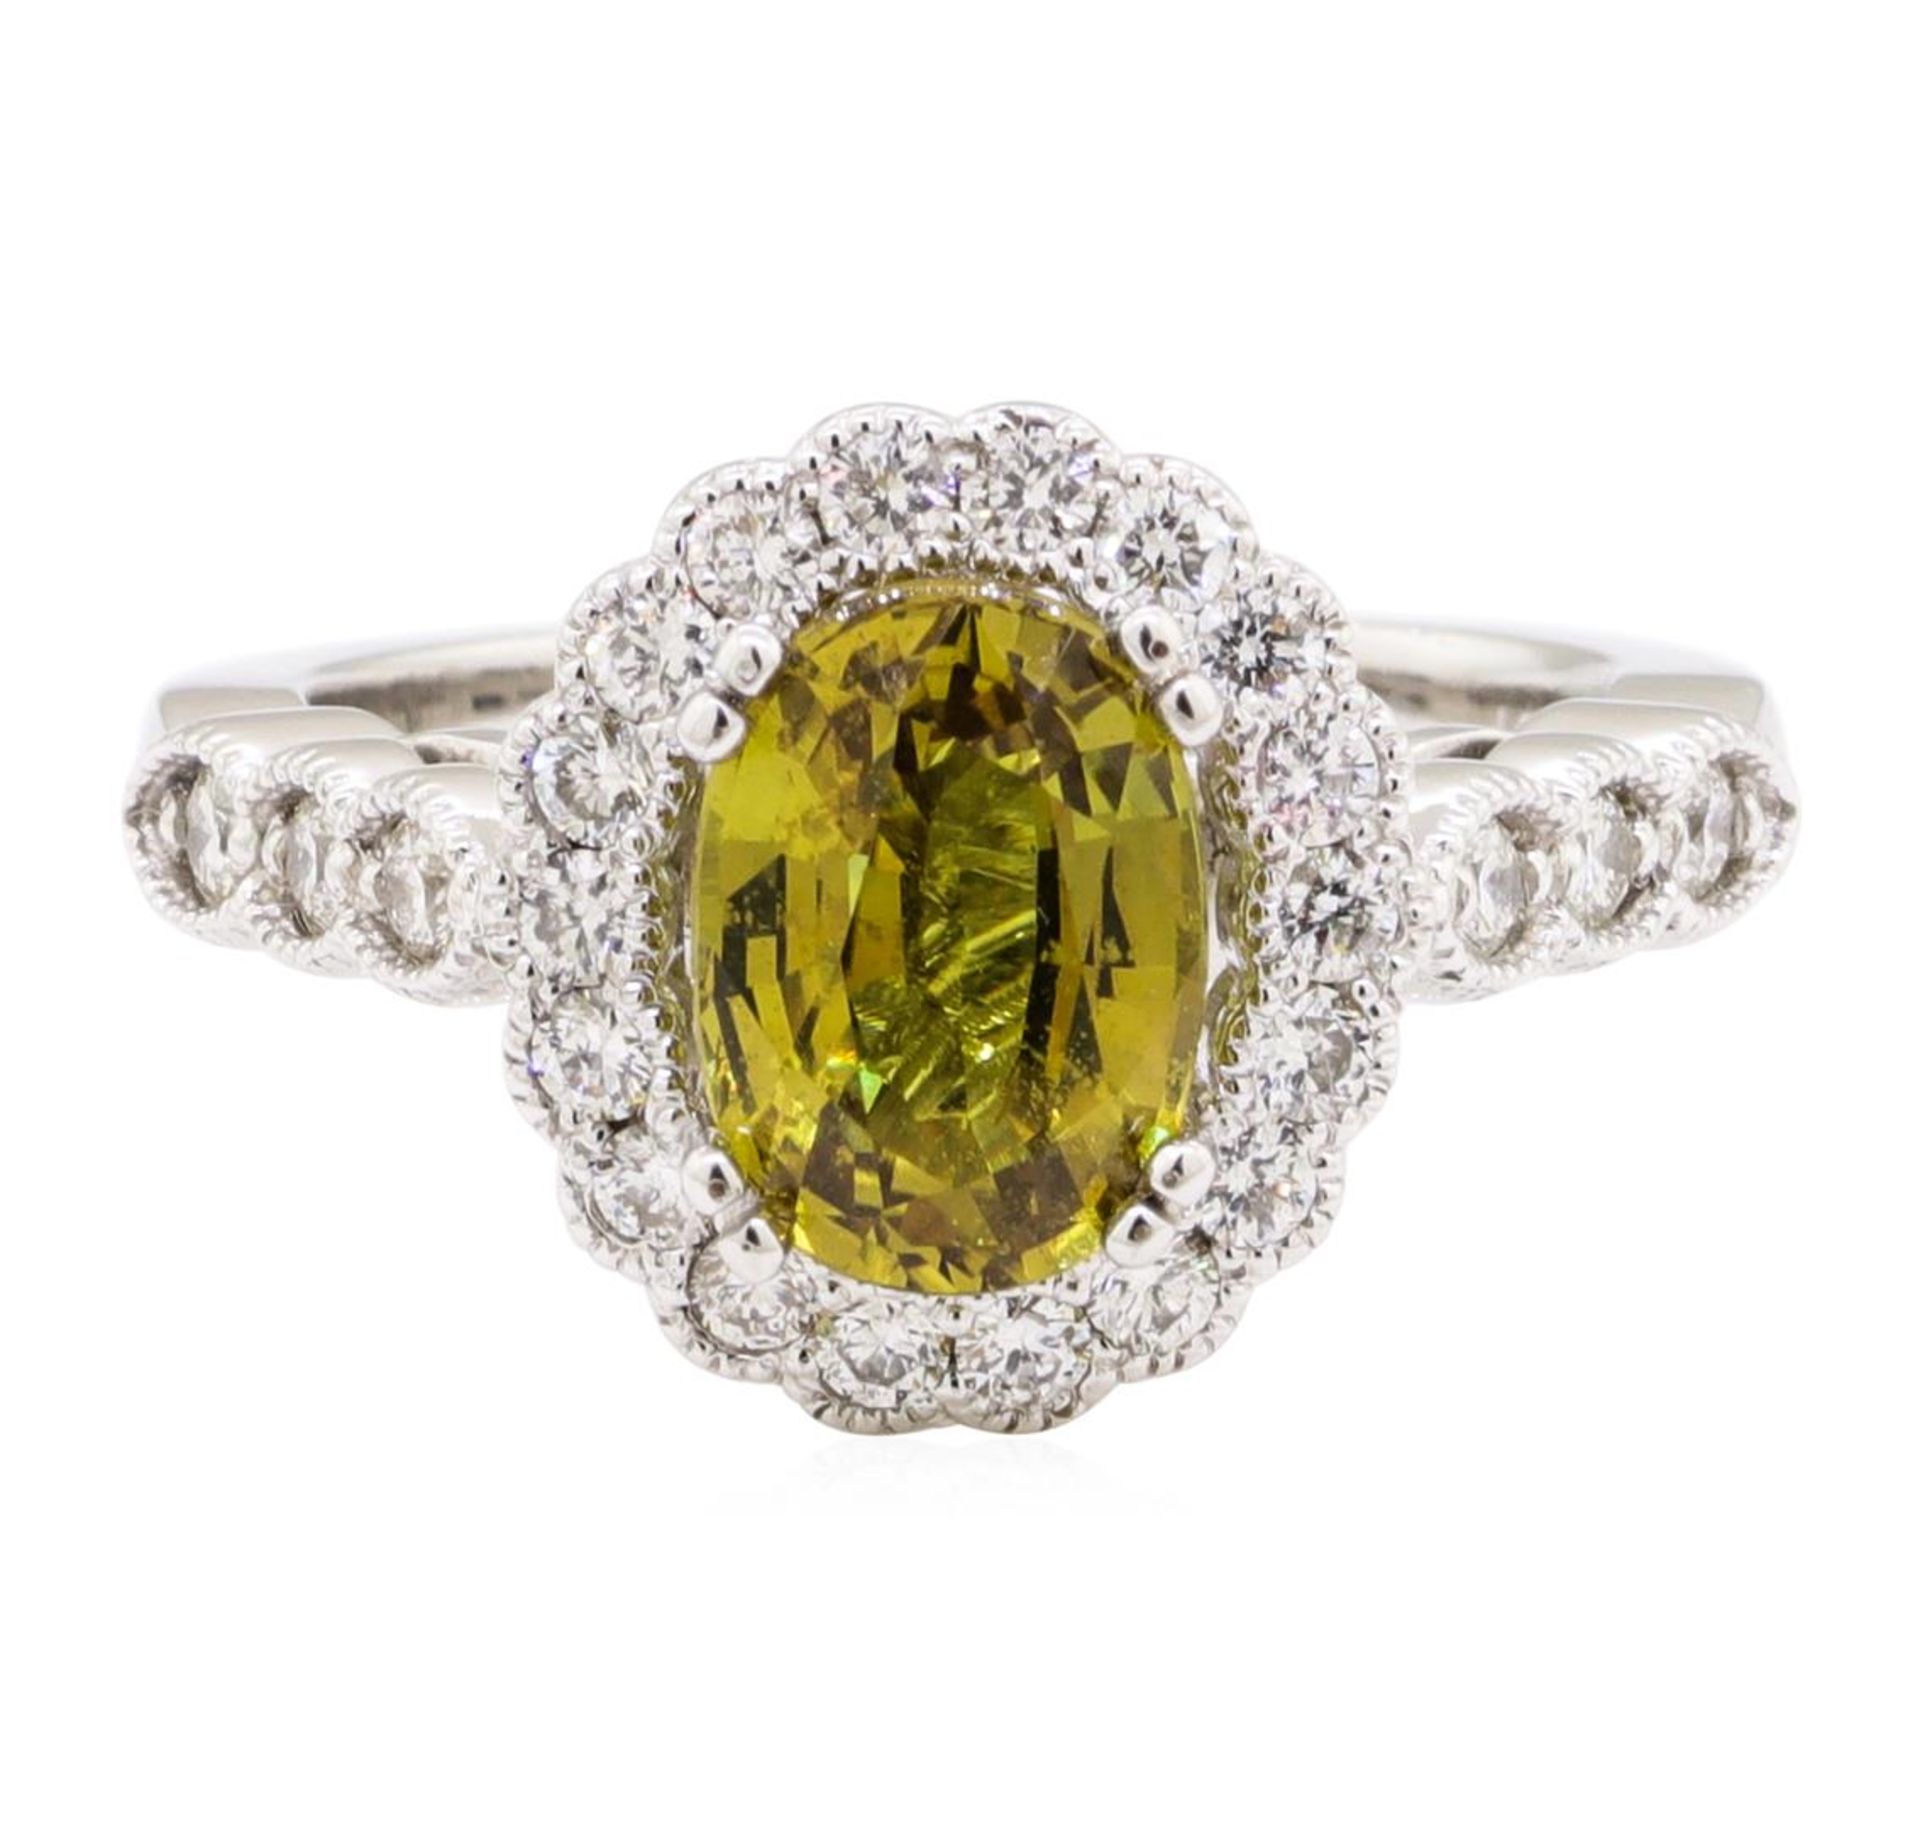 3.17 ctw Oval Mixed Yellow Sapphire And Round Brilliant Cut Diamond Ring - 14KT - Image 2 of 5